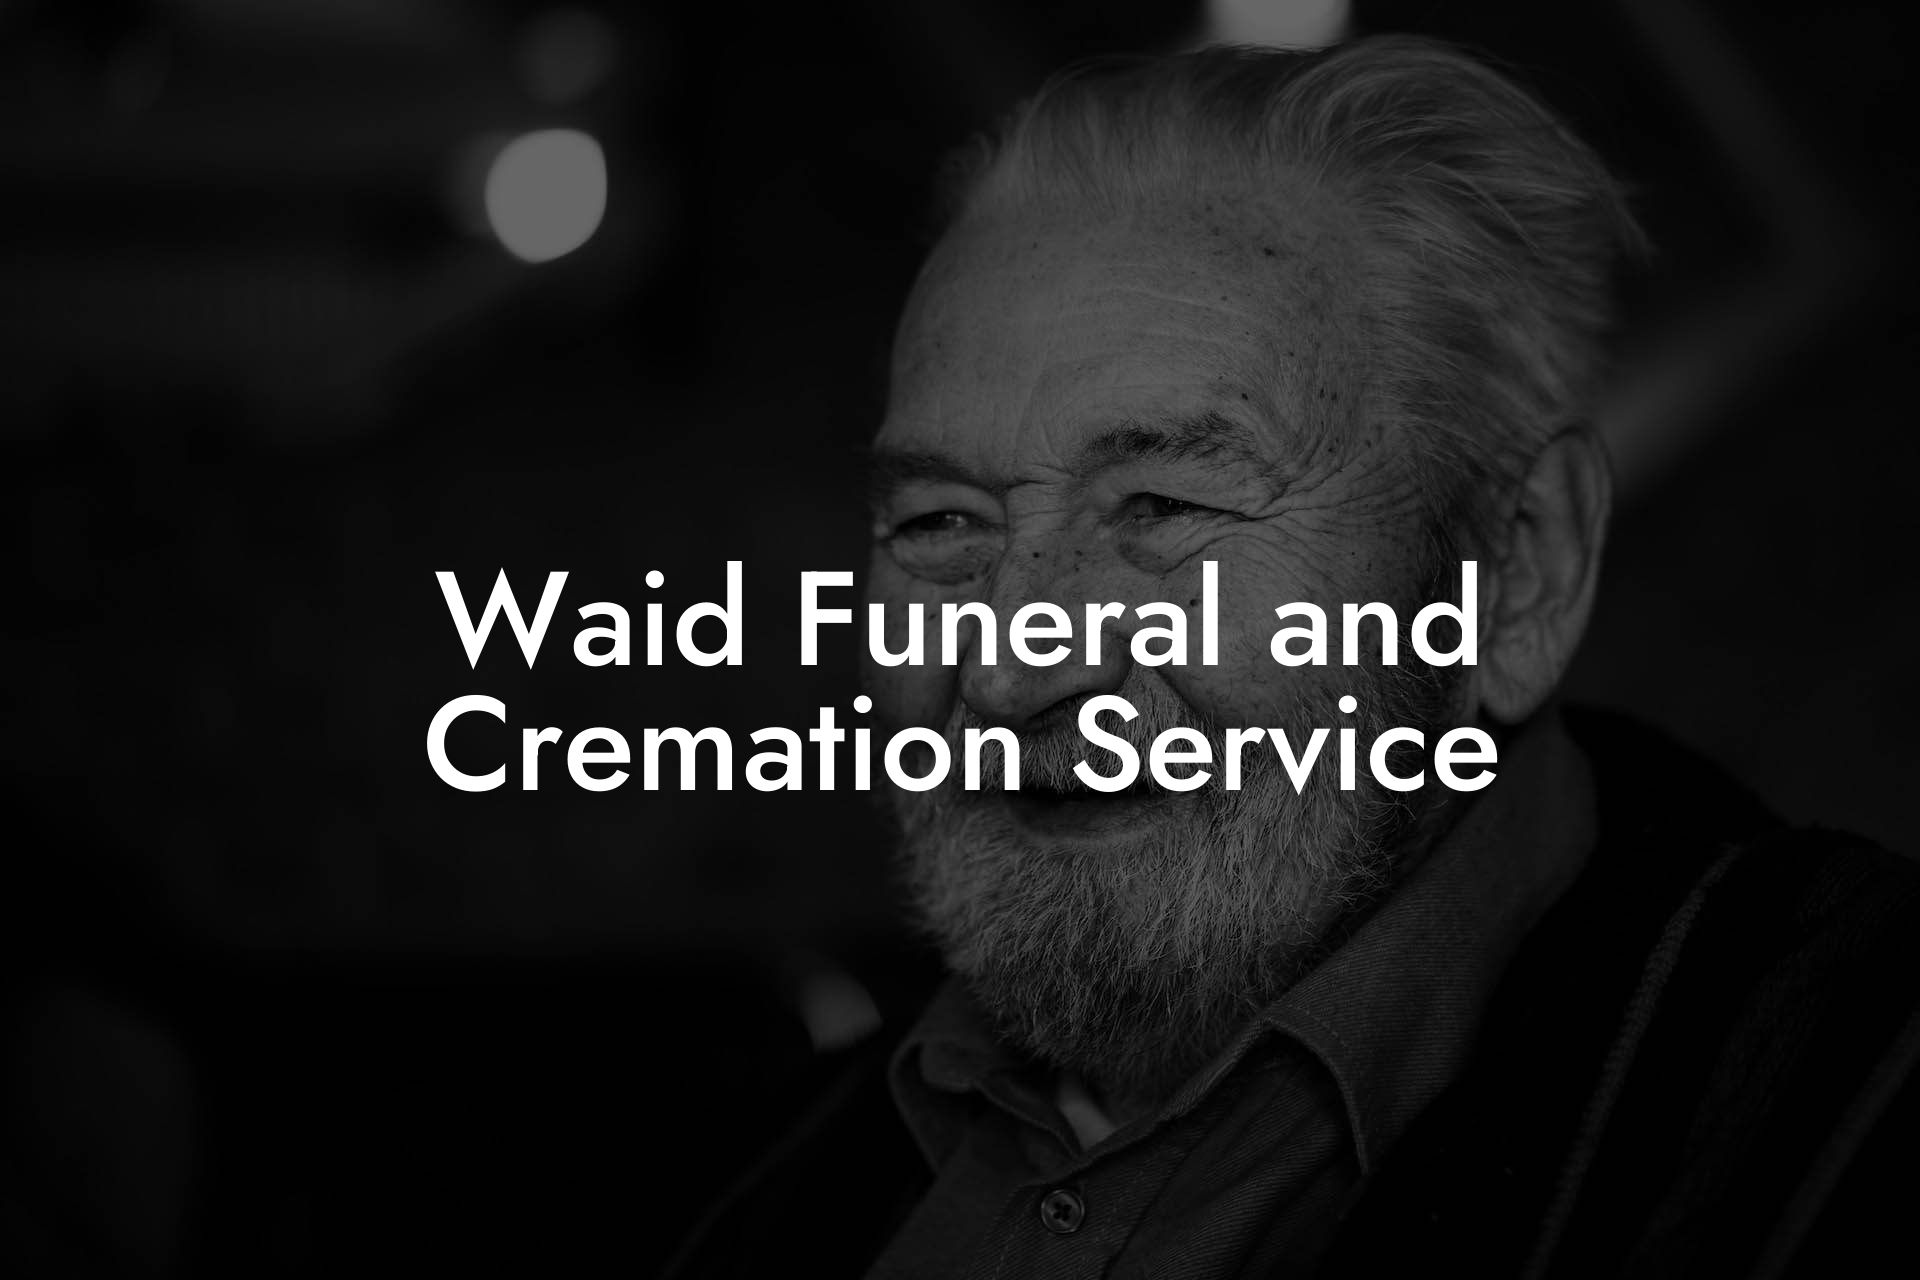 Waid Funeral and Cremation Service